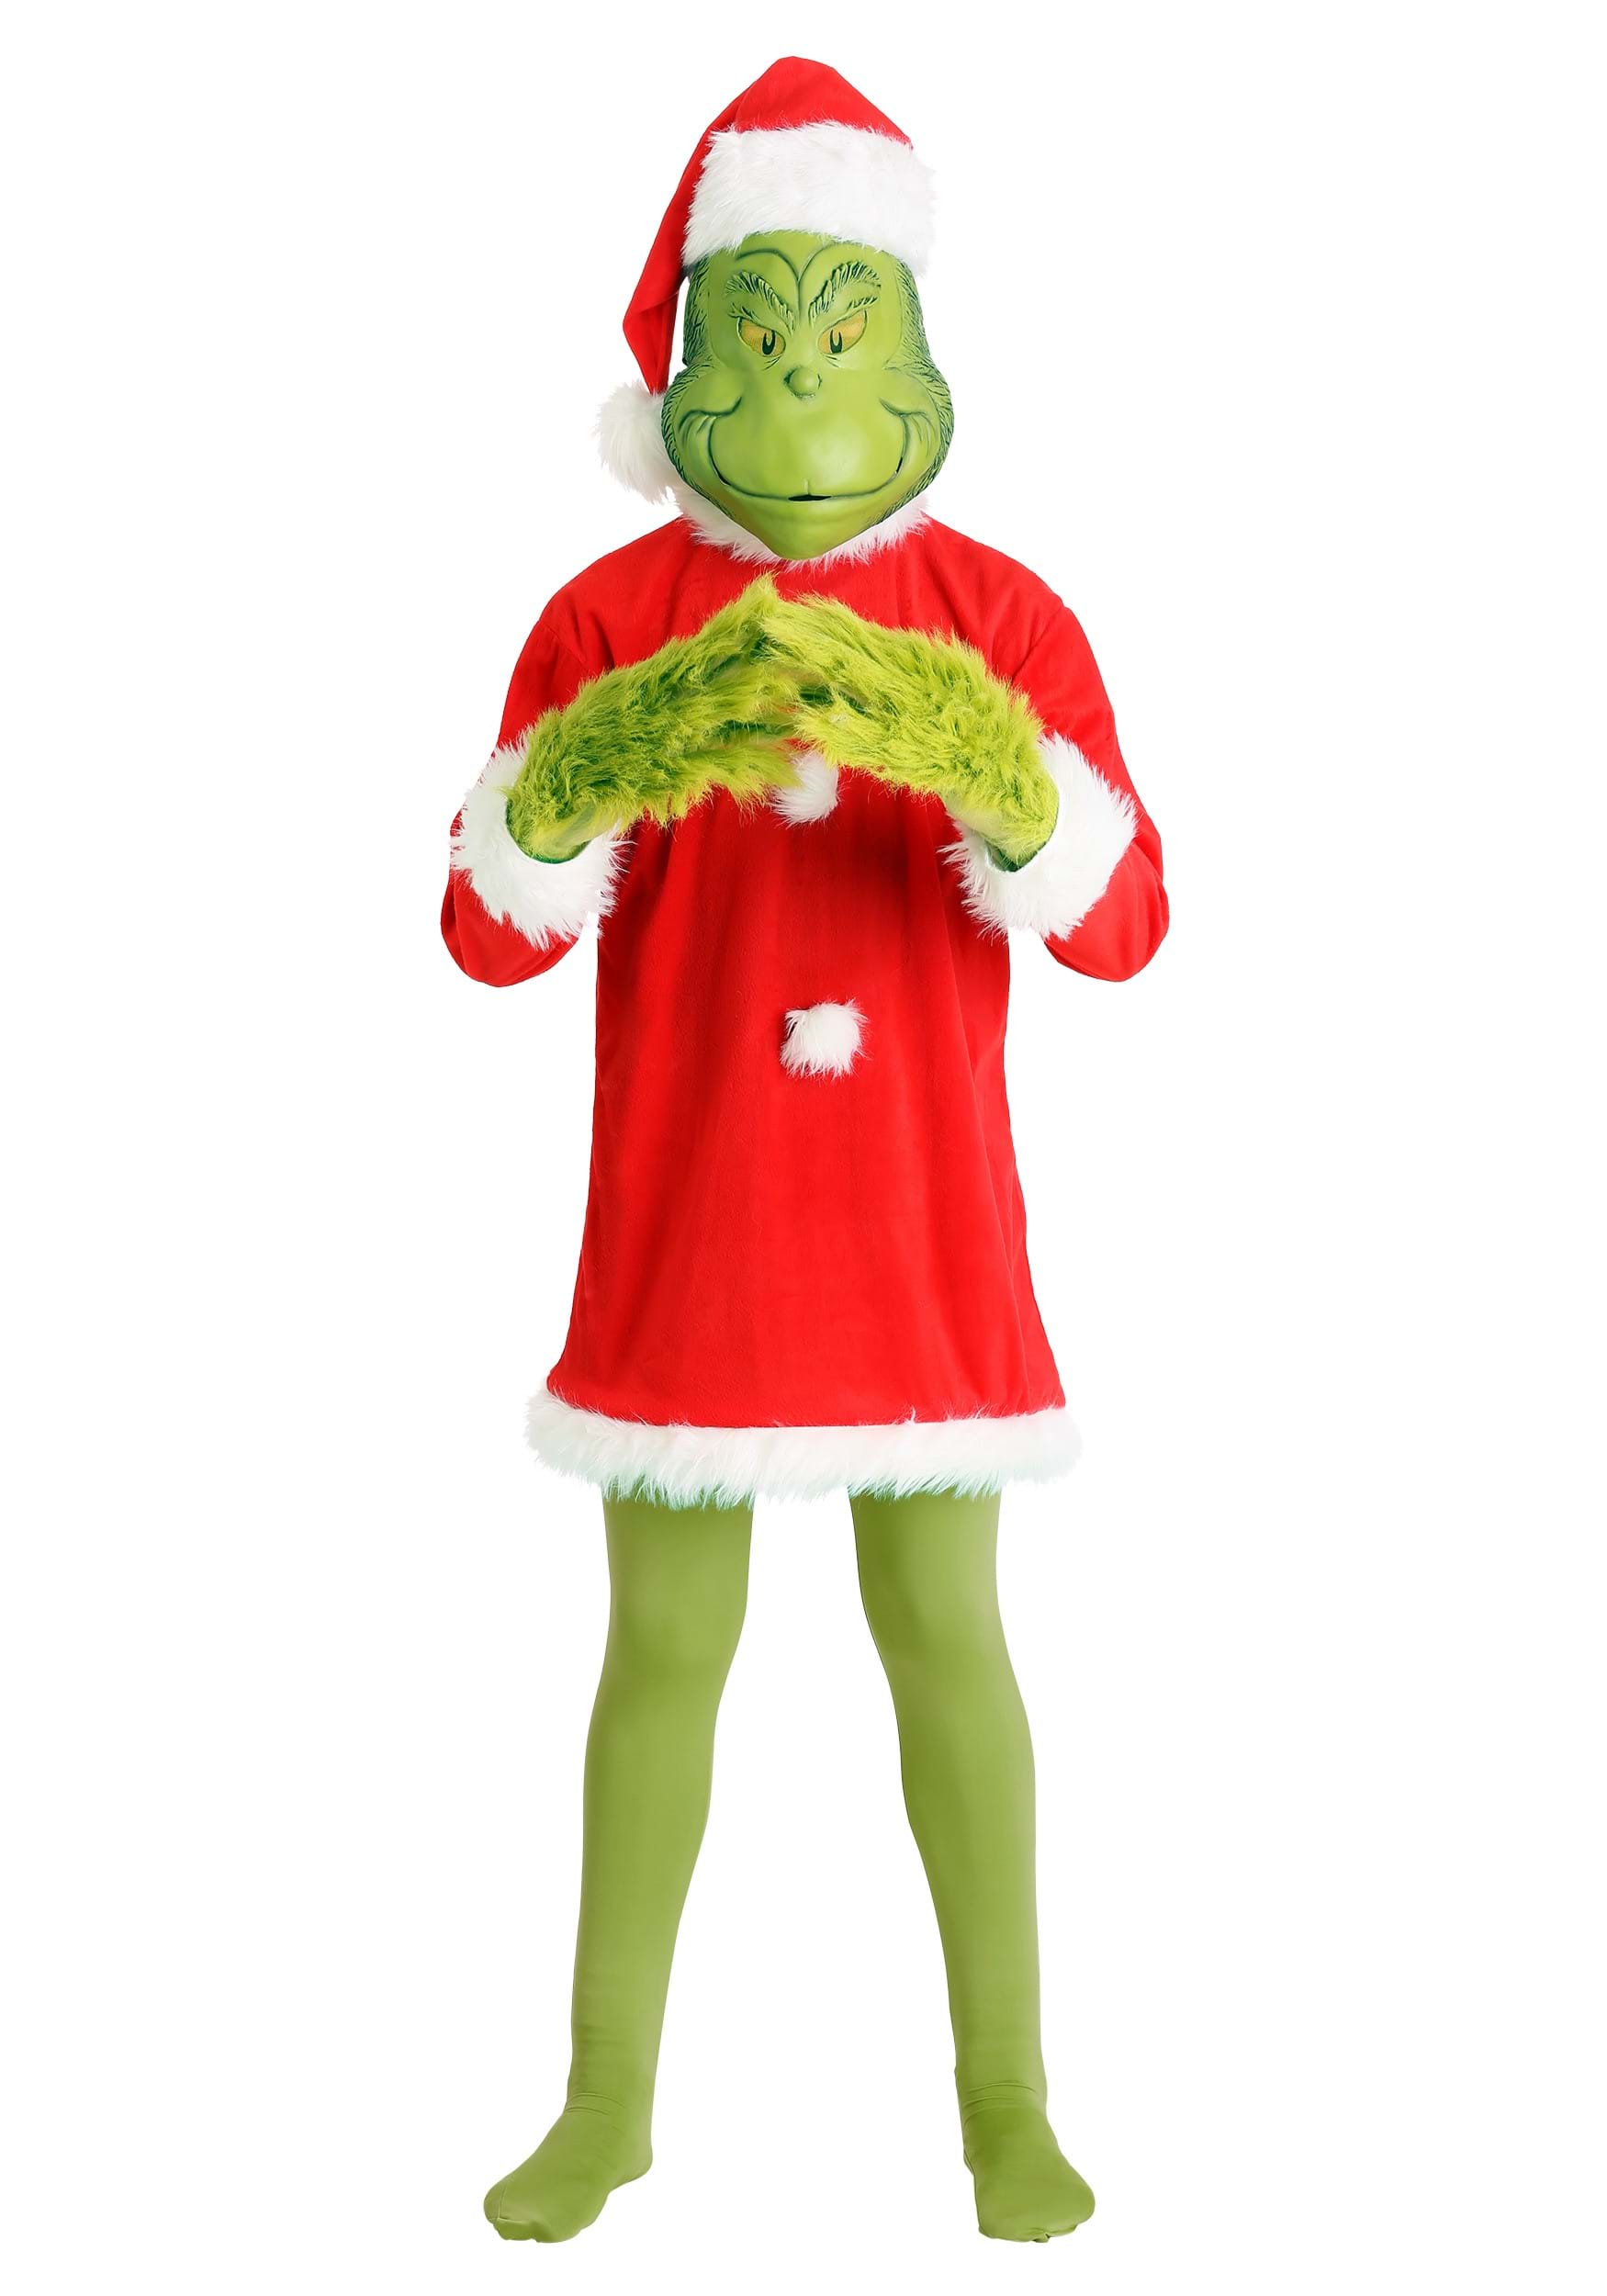 Image of FUN Costumes Deluxe Grinch Costume for Men | Christmas Costumes